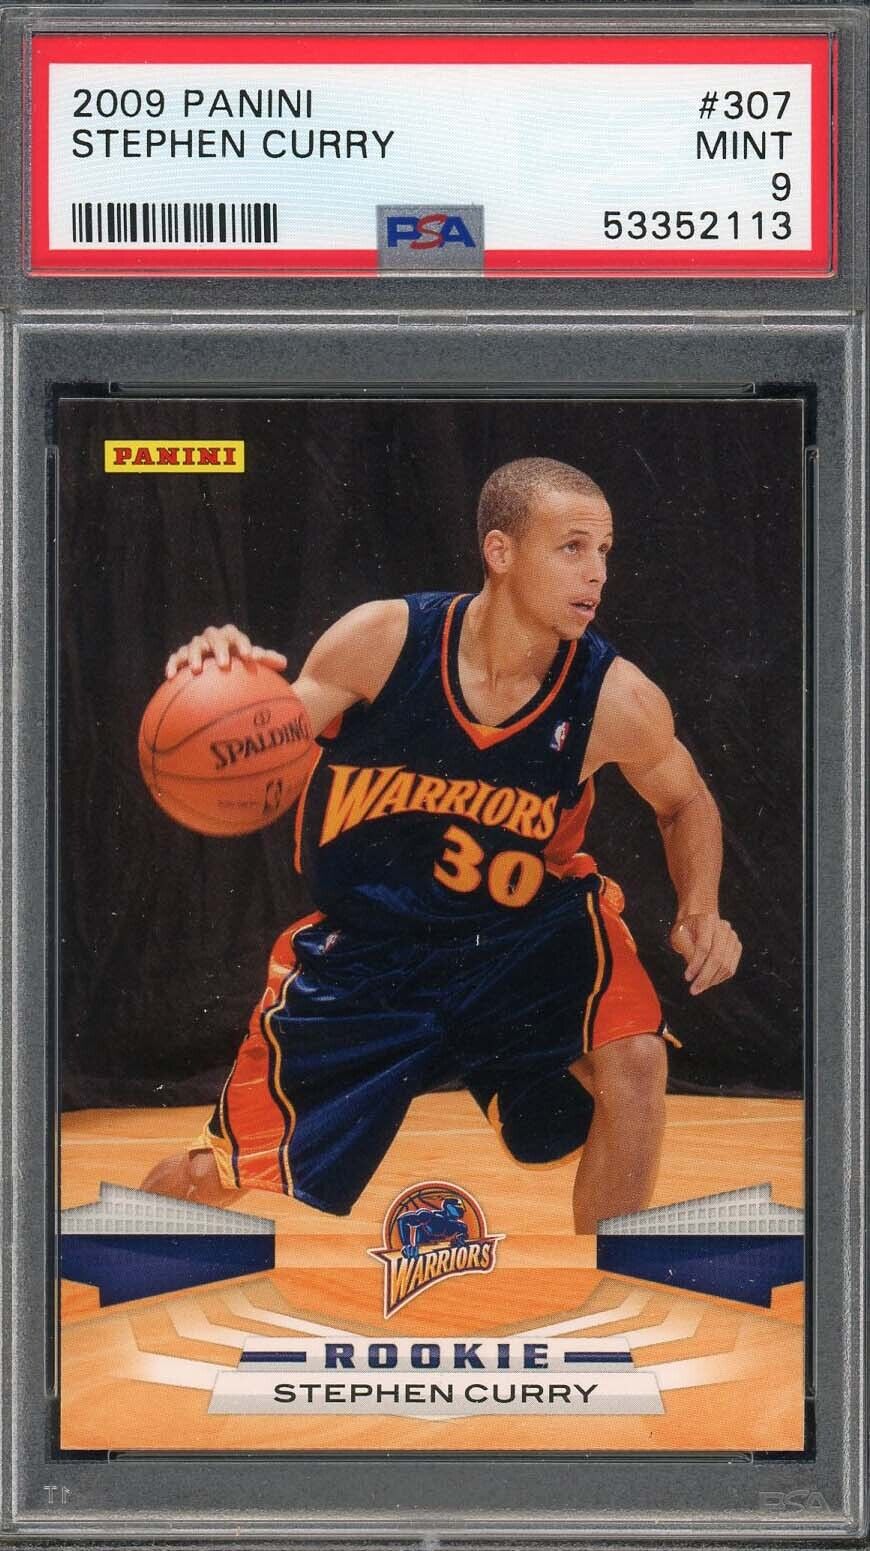 Stephen Curry 2009 Panini Basketball Rookie Card RC #307 Graded PSA 9